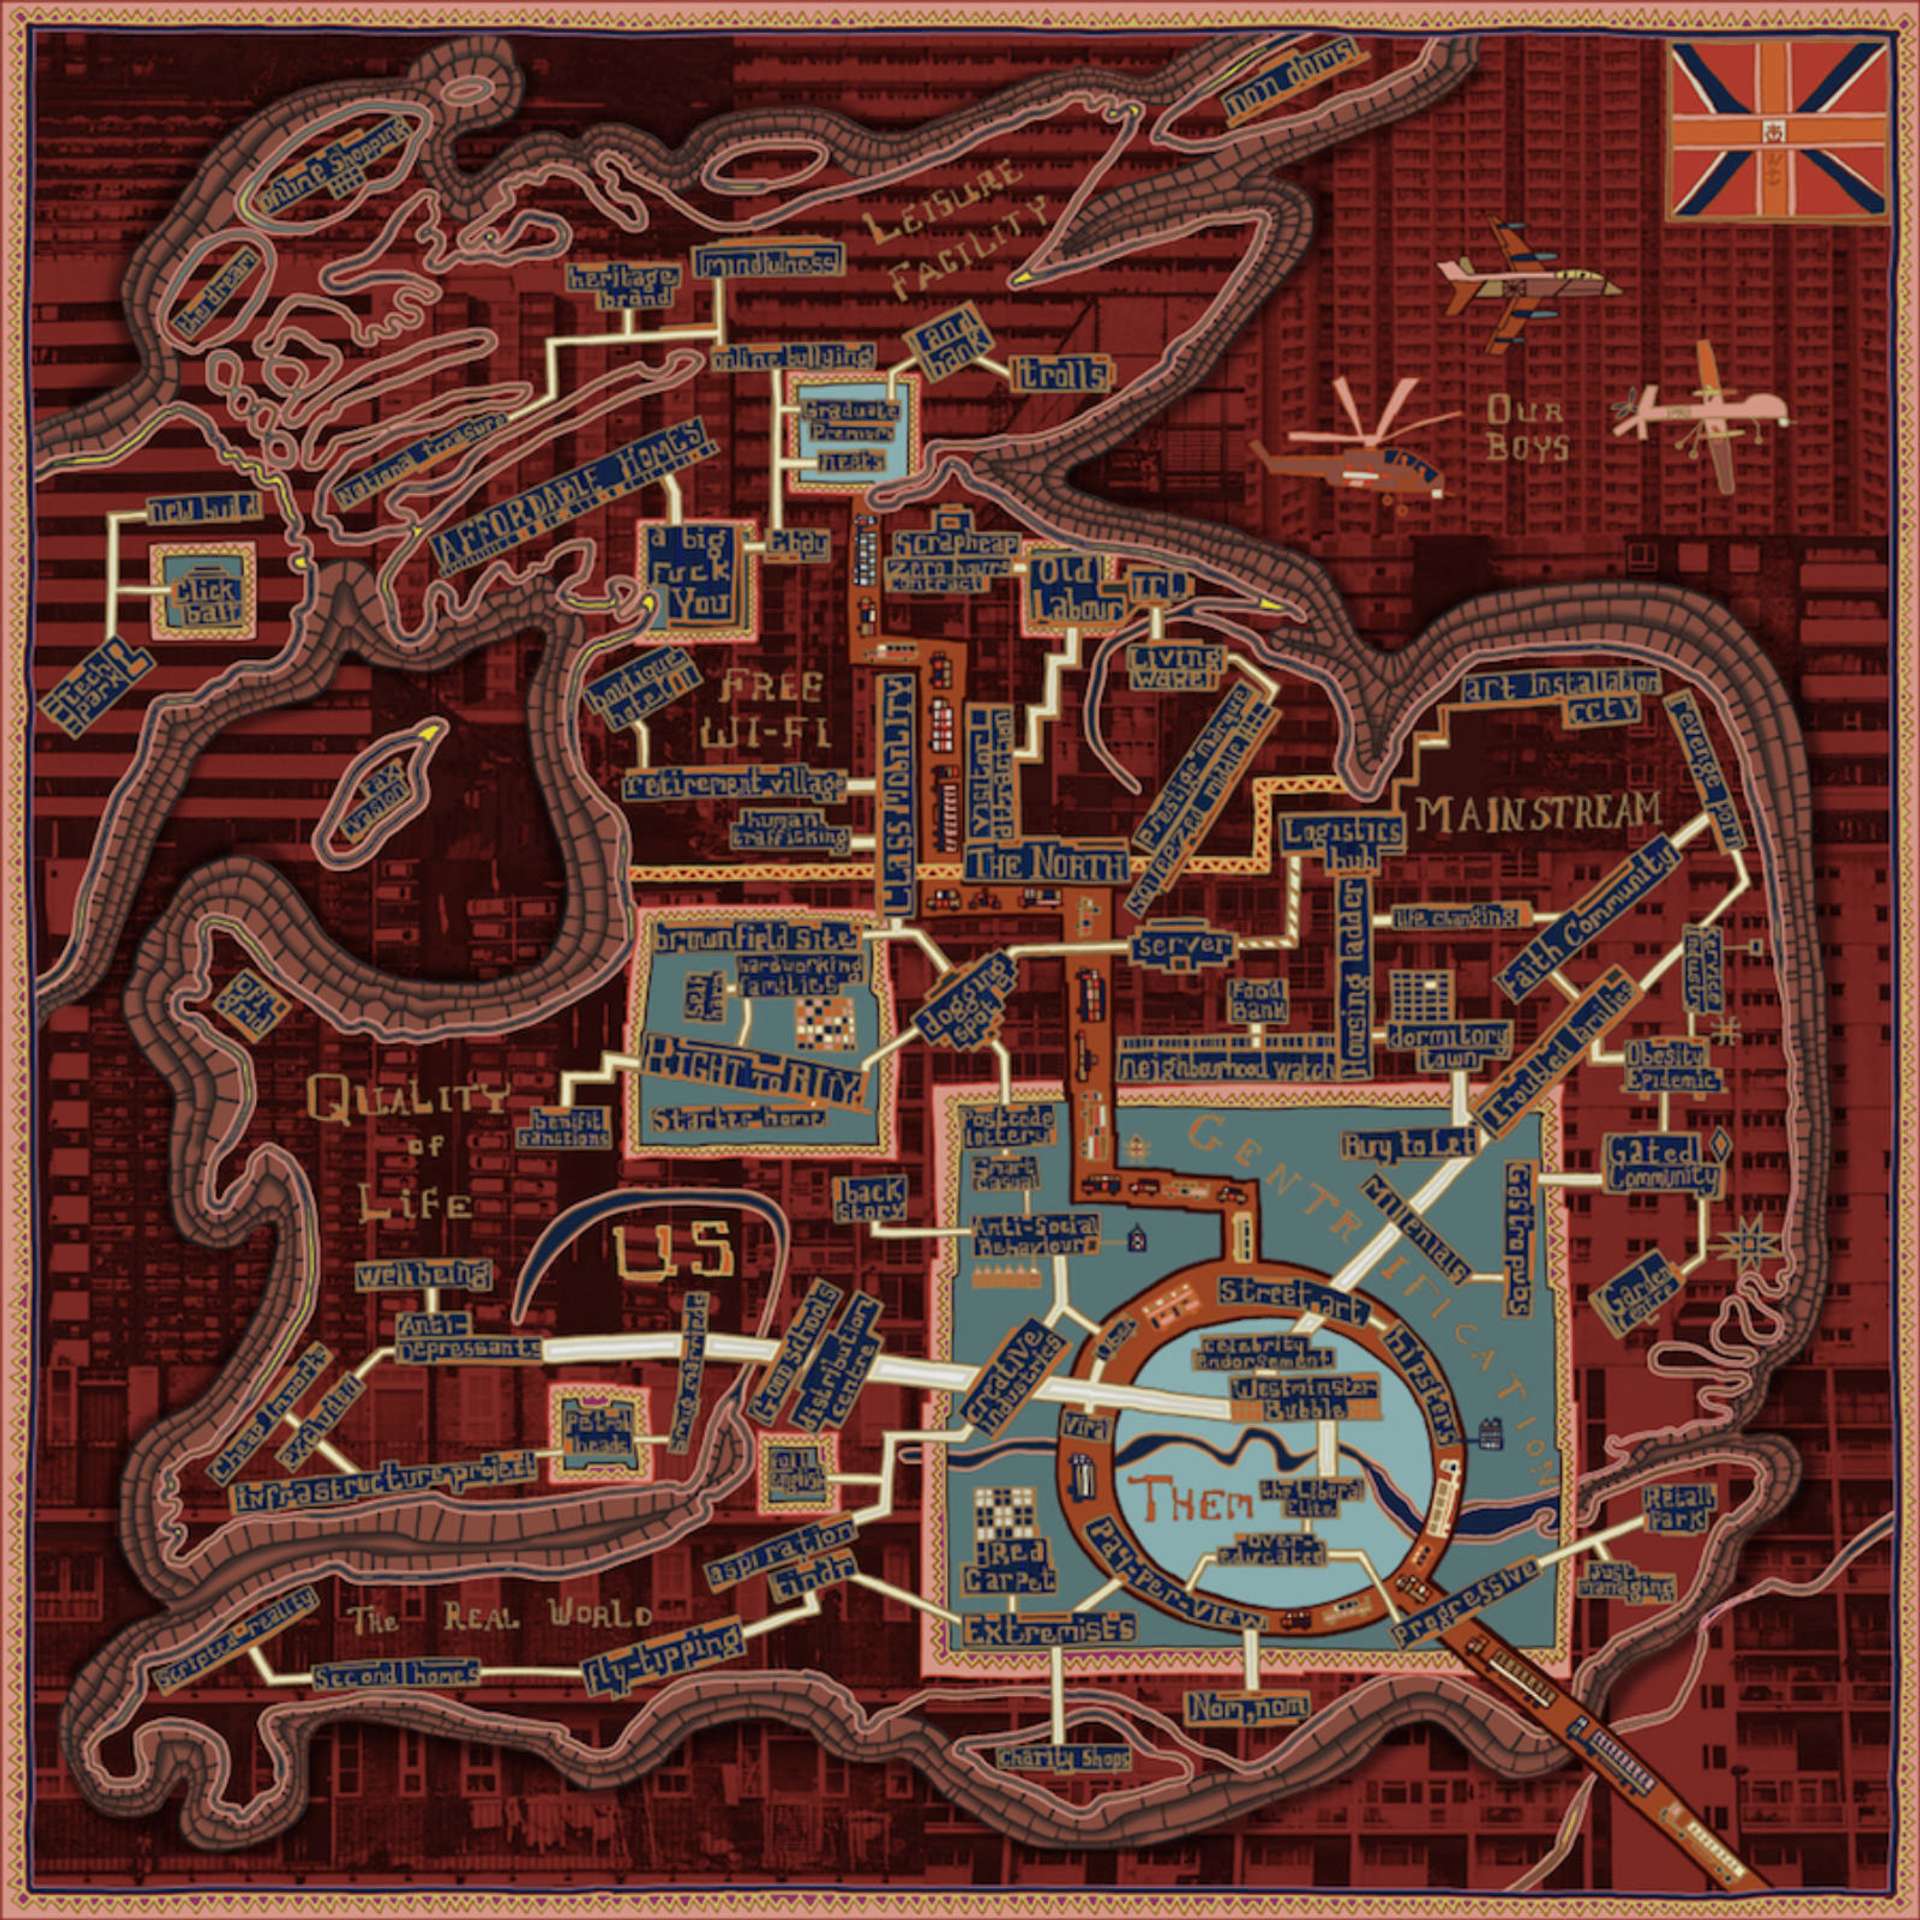 Dark red tapestry featuring an outline that resembles the shape of England. Within it, text describes contentious issues within Britain at the time of creation, featuring words such as ‘gated community’ ‘obesity epidemic’ and ‘old labour’. In the top right, a union jack and fighter jets fill the space.